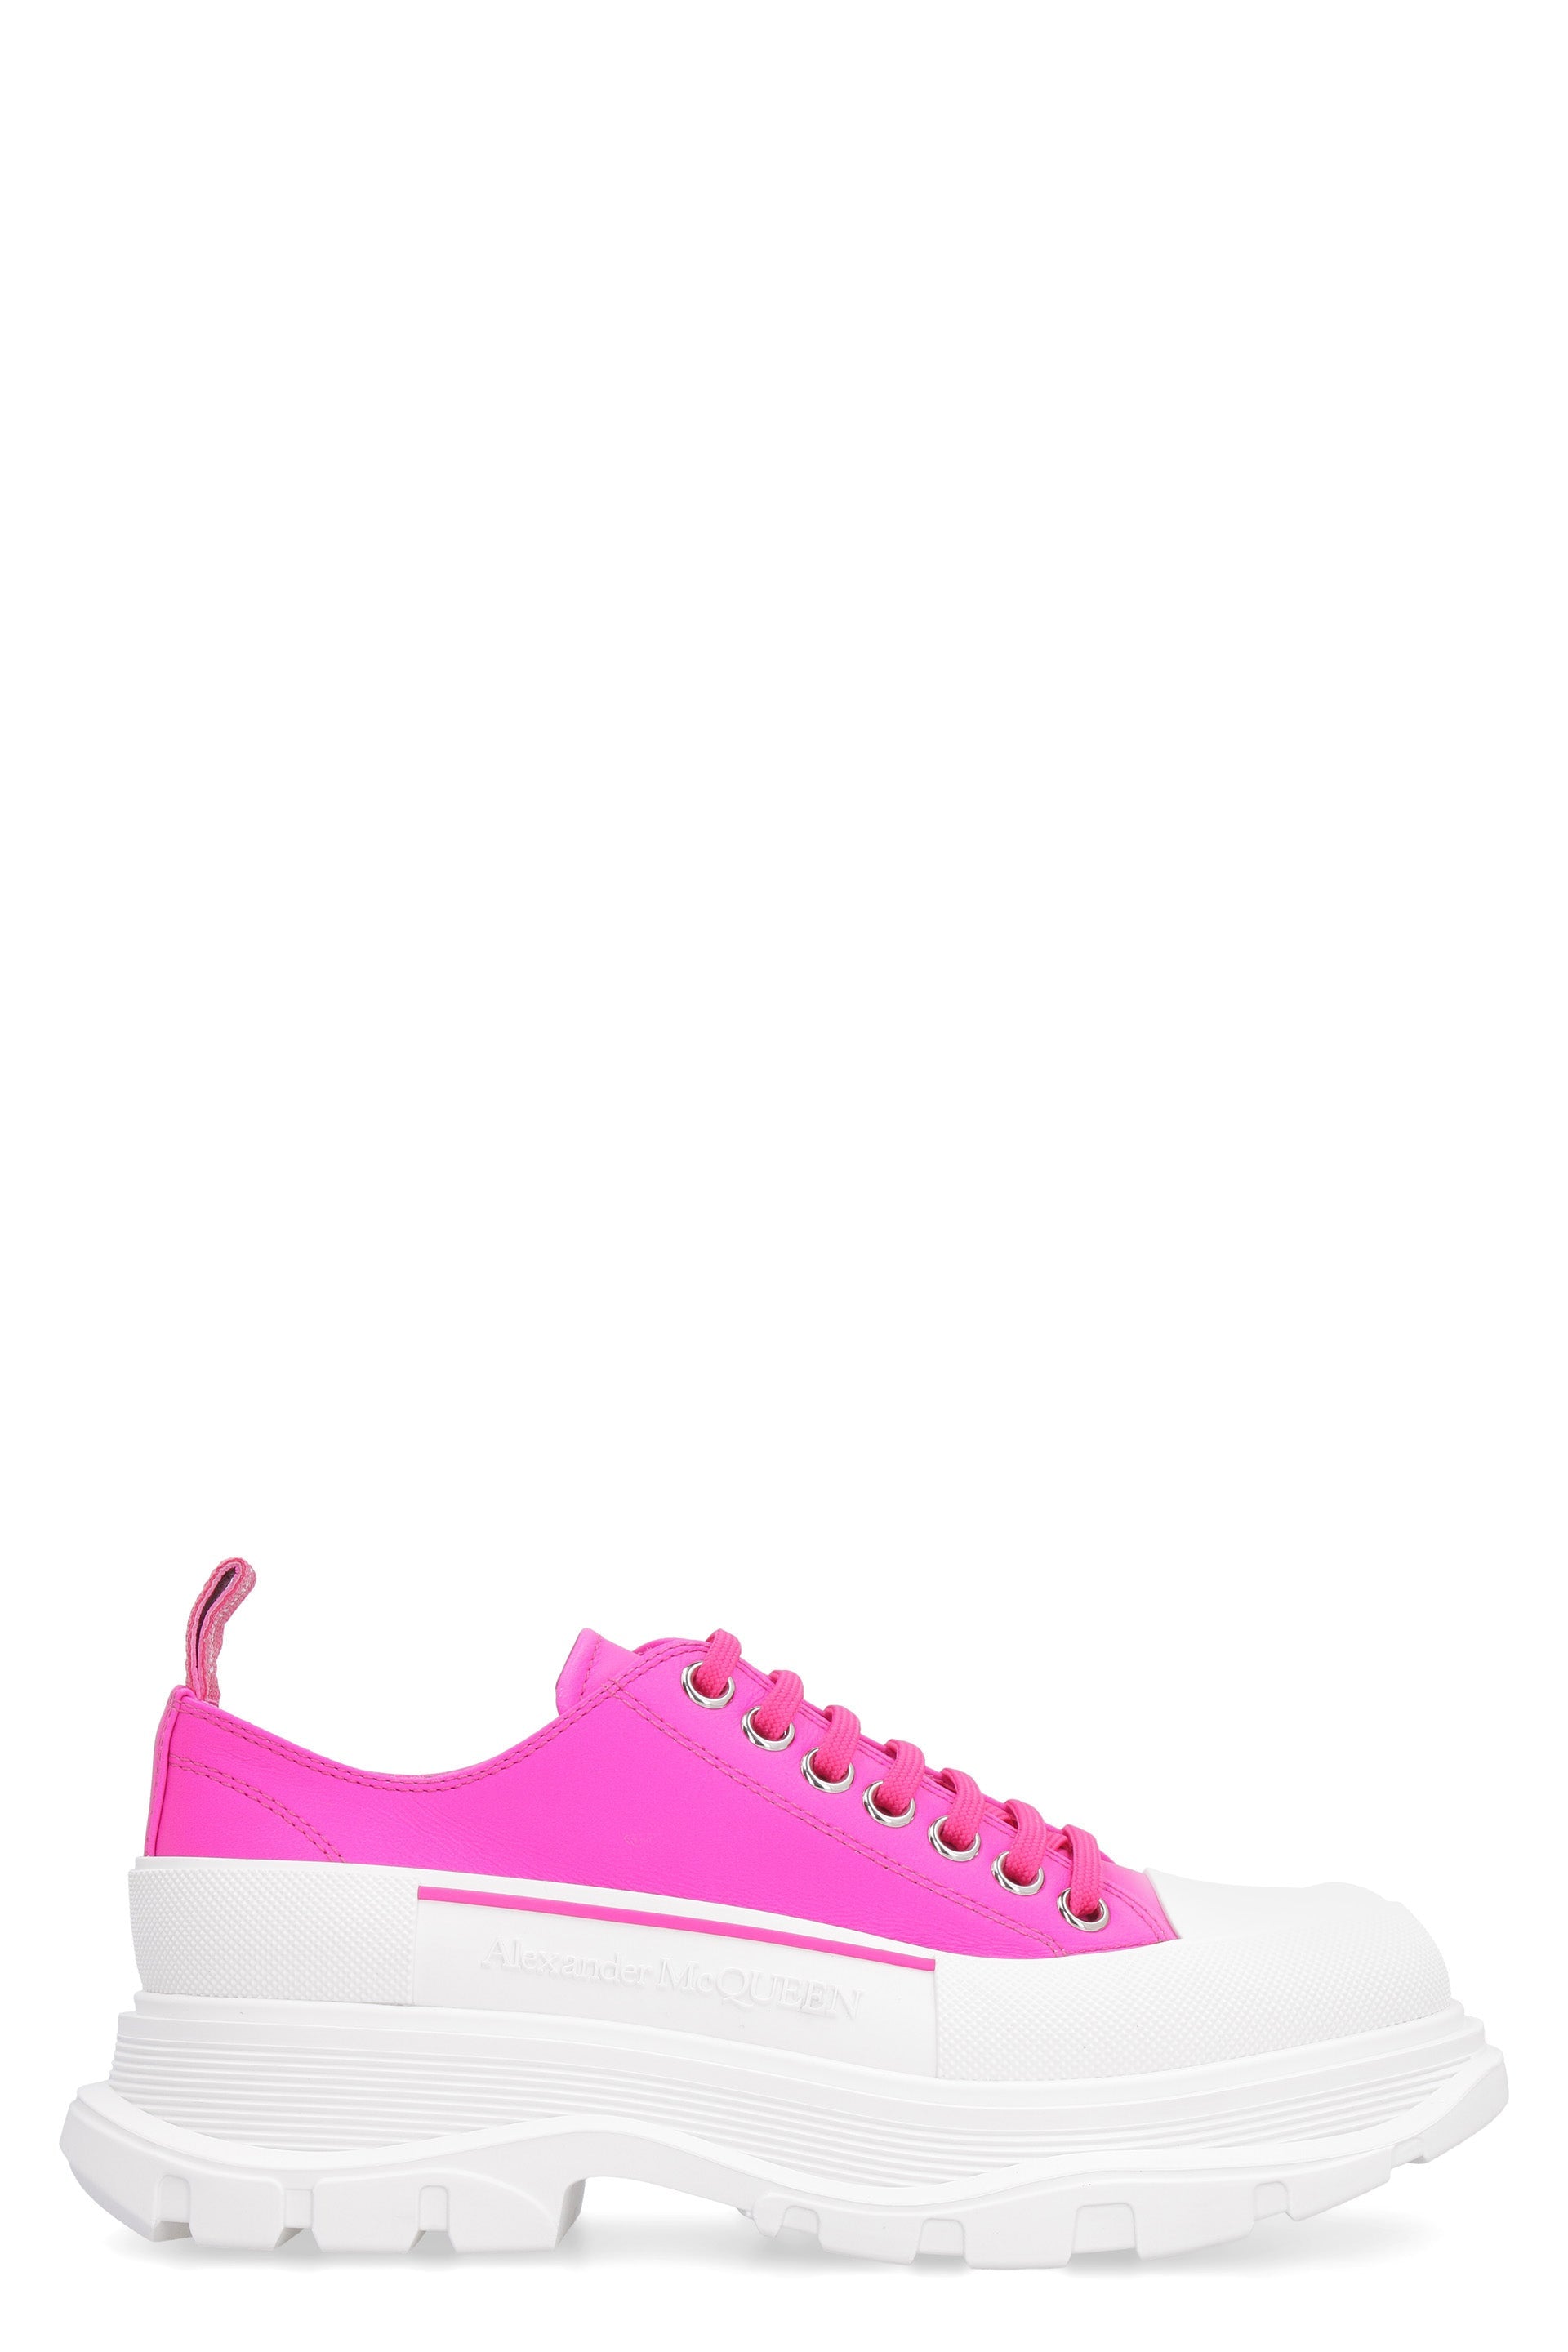 Tread Slick chunky sneakers-Alexander McQueen-OUTLET-SALE-35-ARCHIVIST